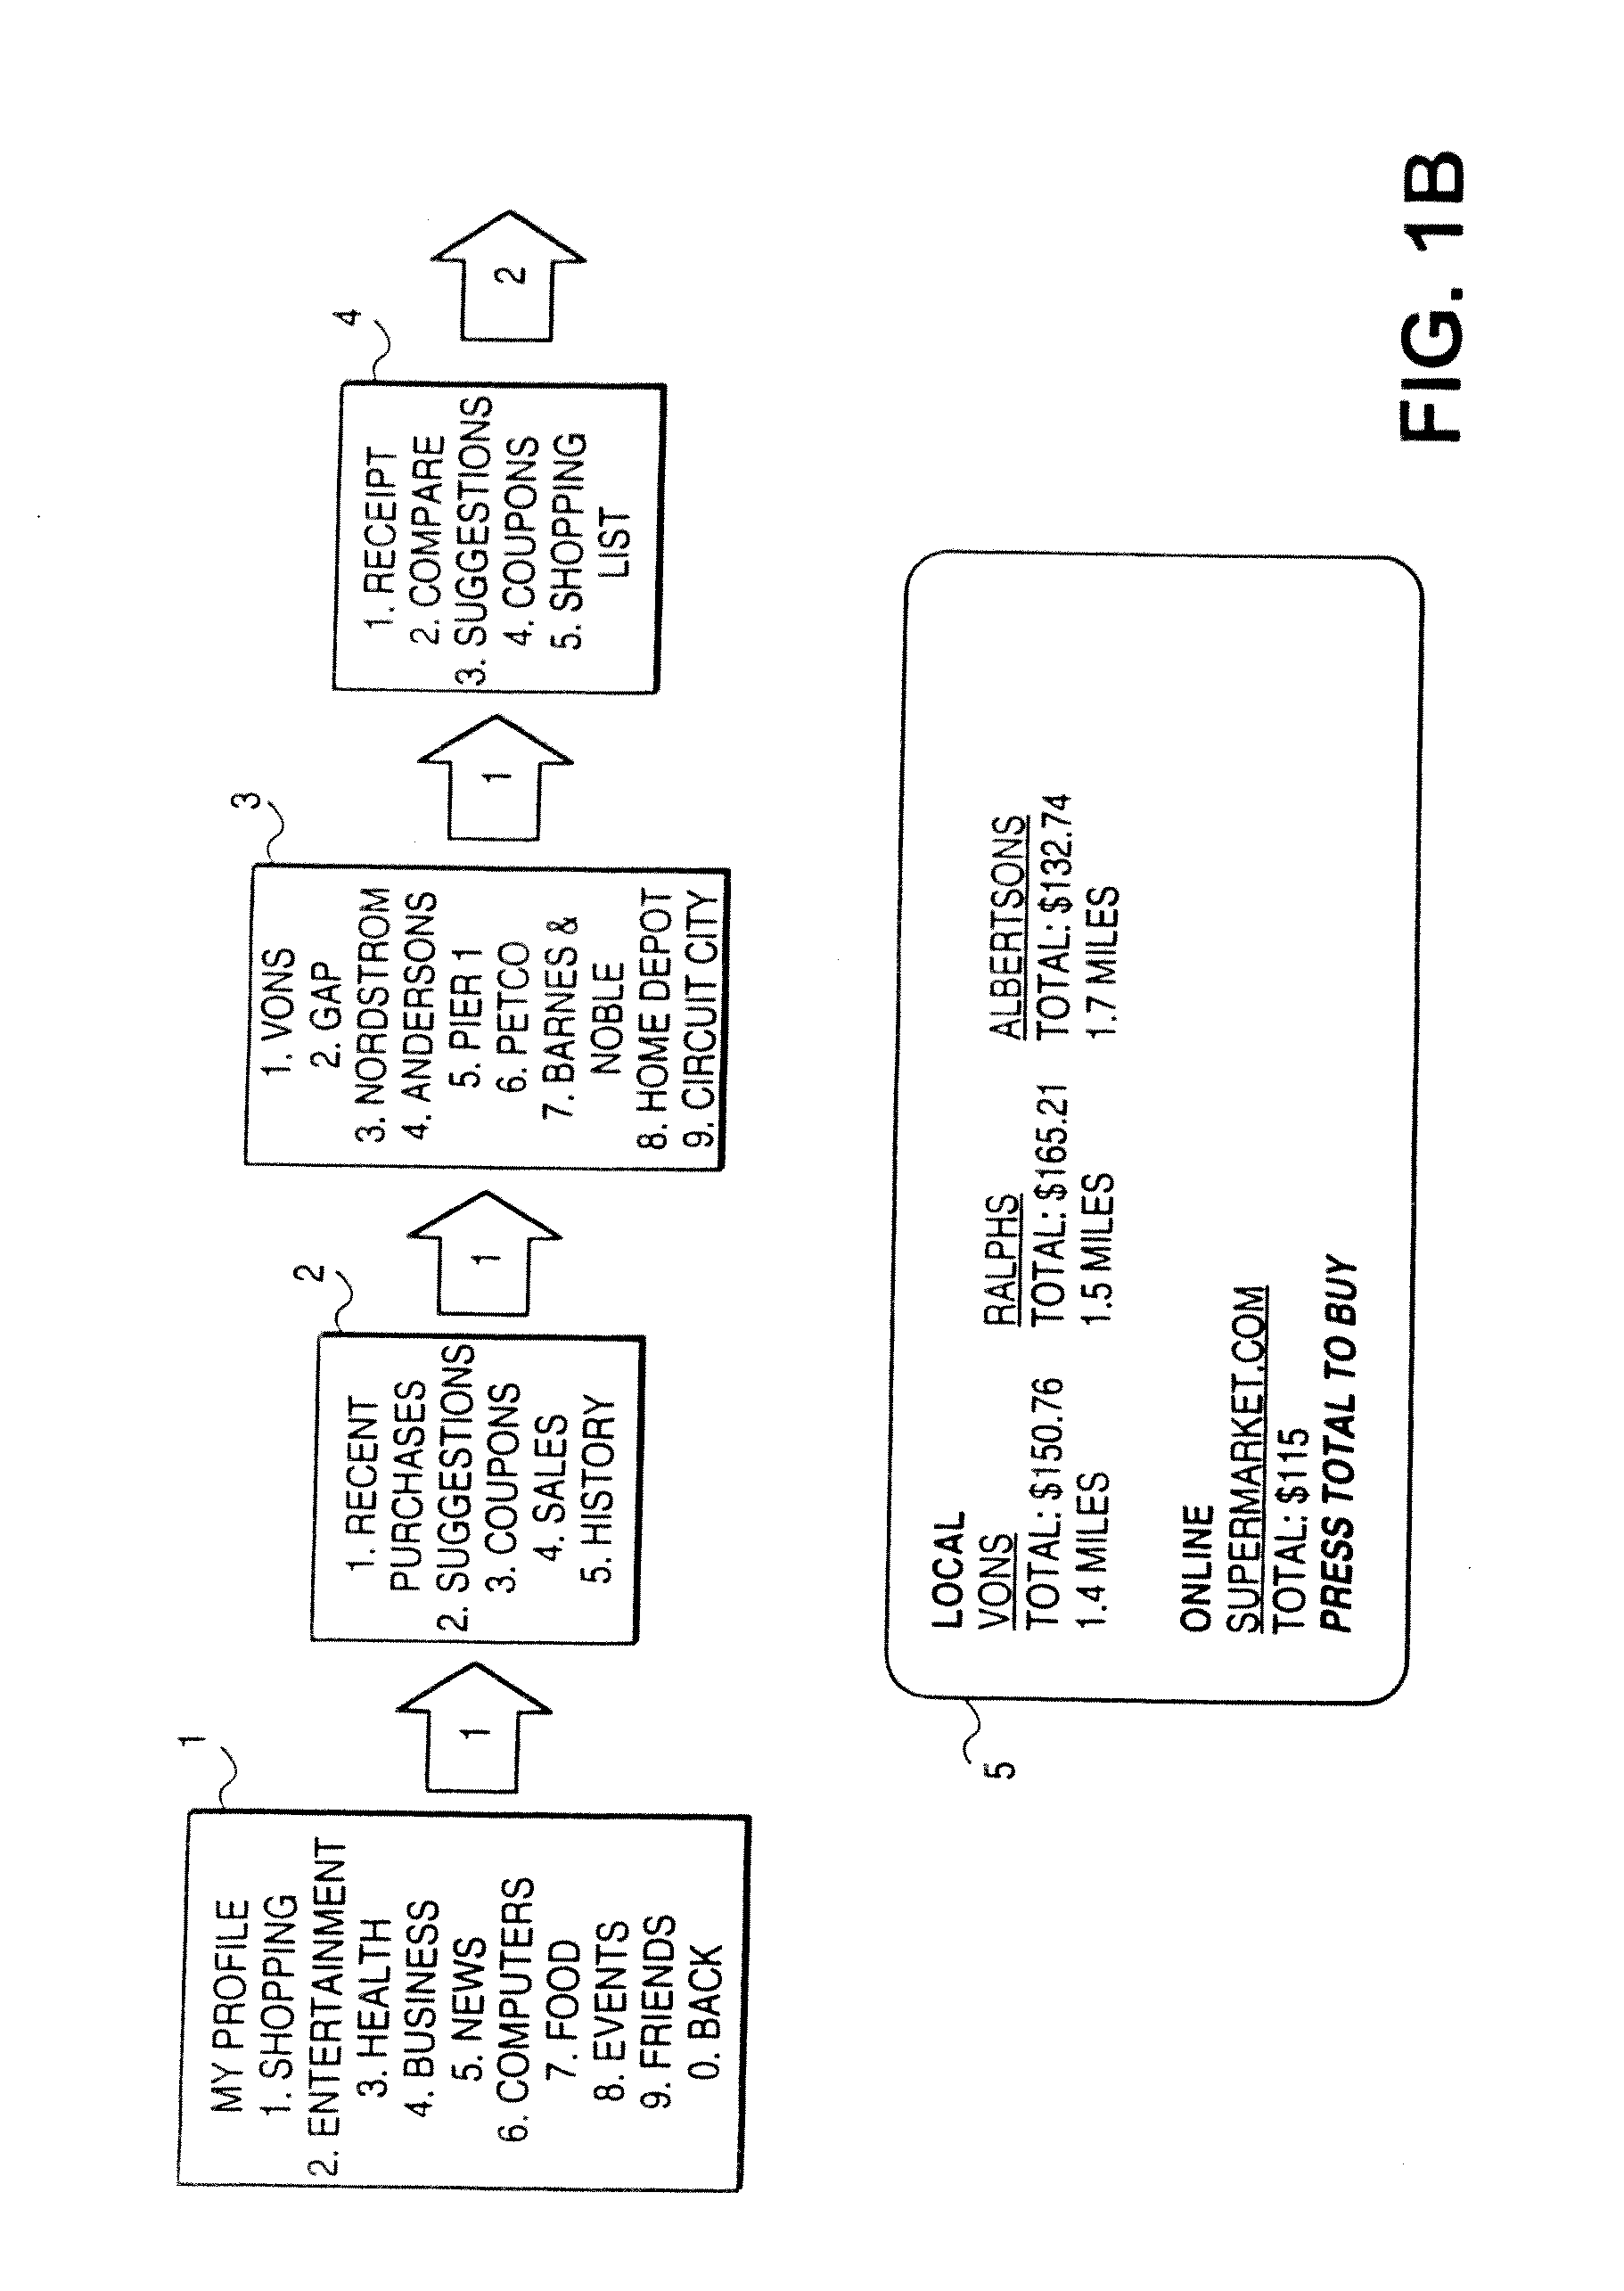 Method for Providing Information and Recommendations Based on User Activity